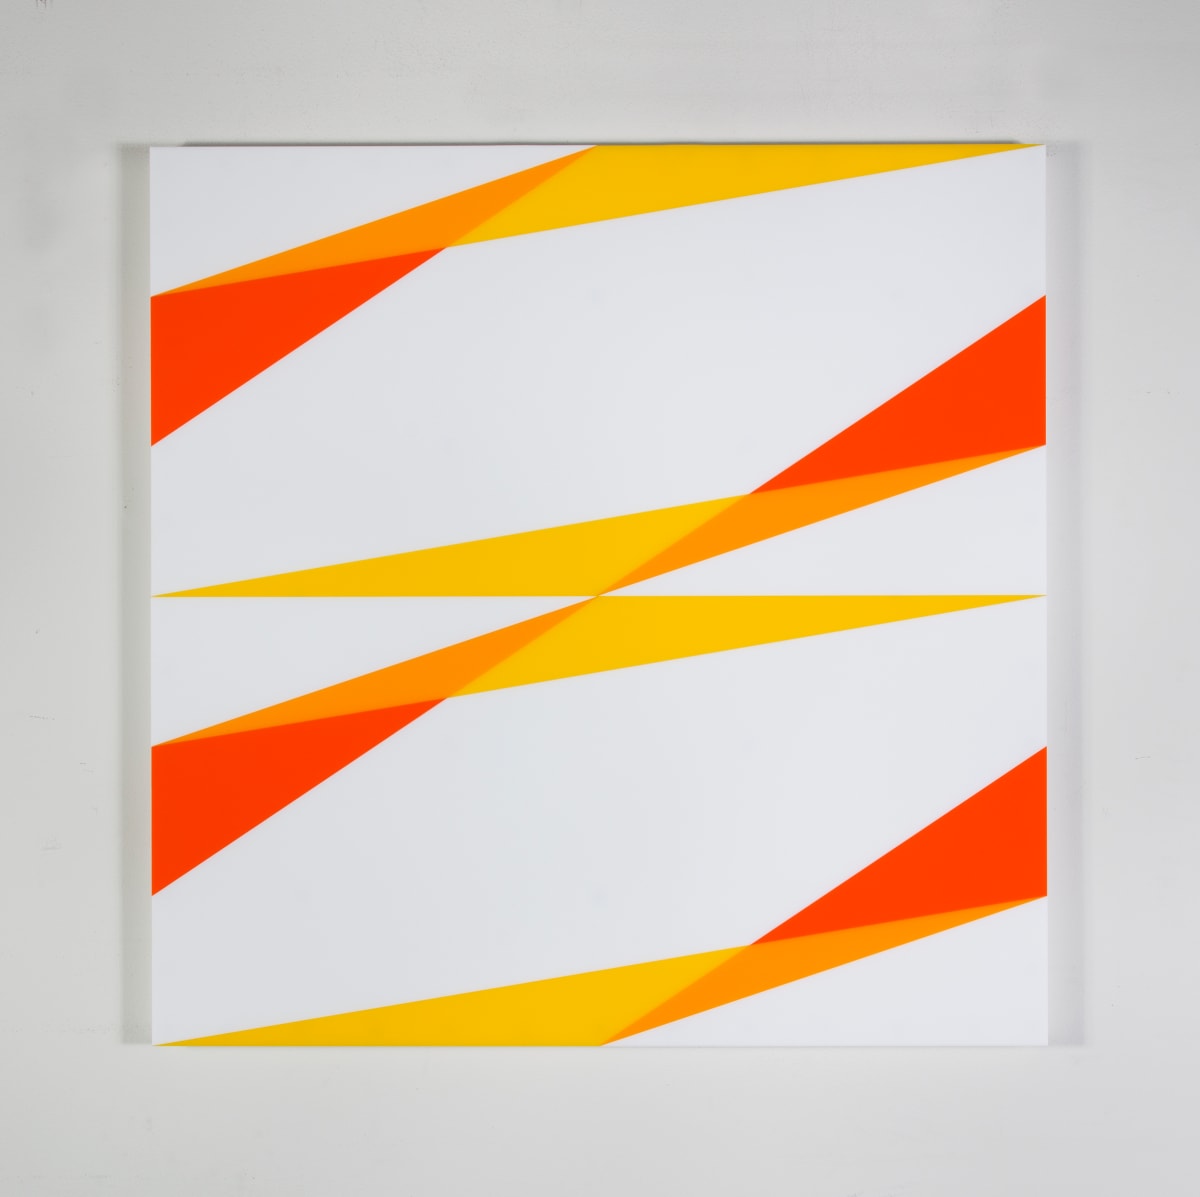 Composition in 2465 Yellow, 2016 Yellow, 2119 Orange and 7508M White by Brian Zink 